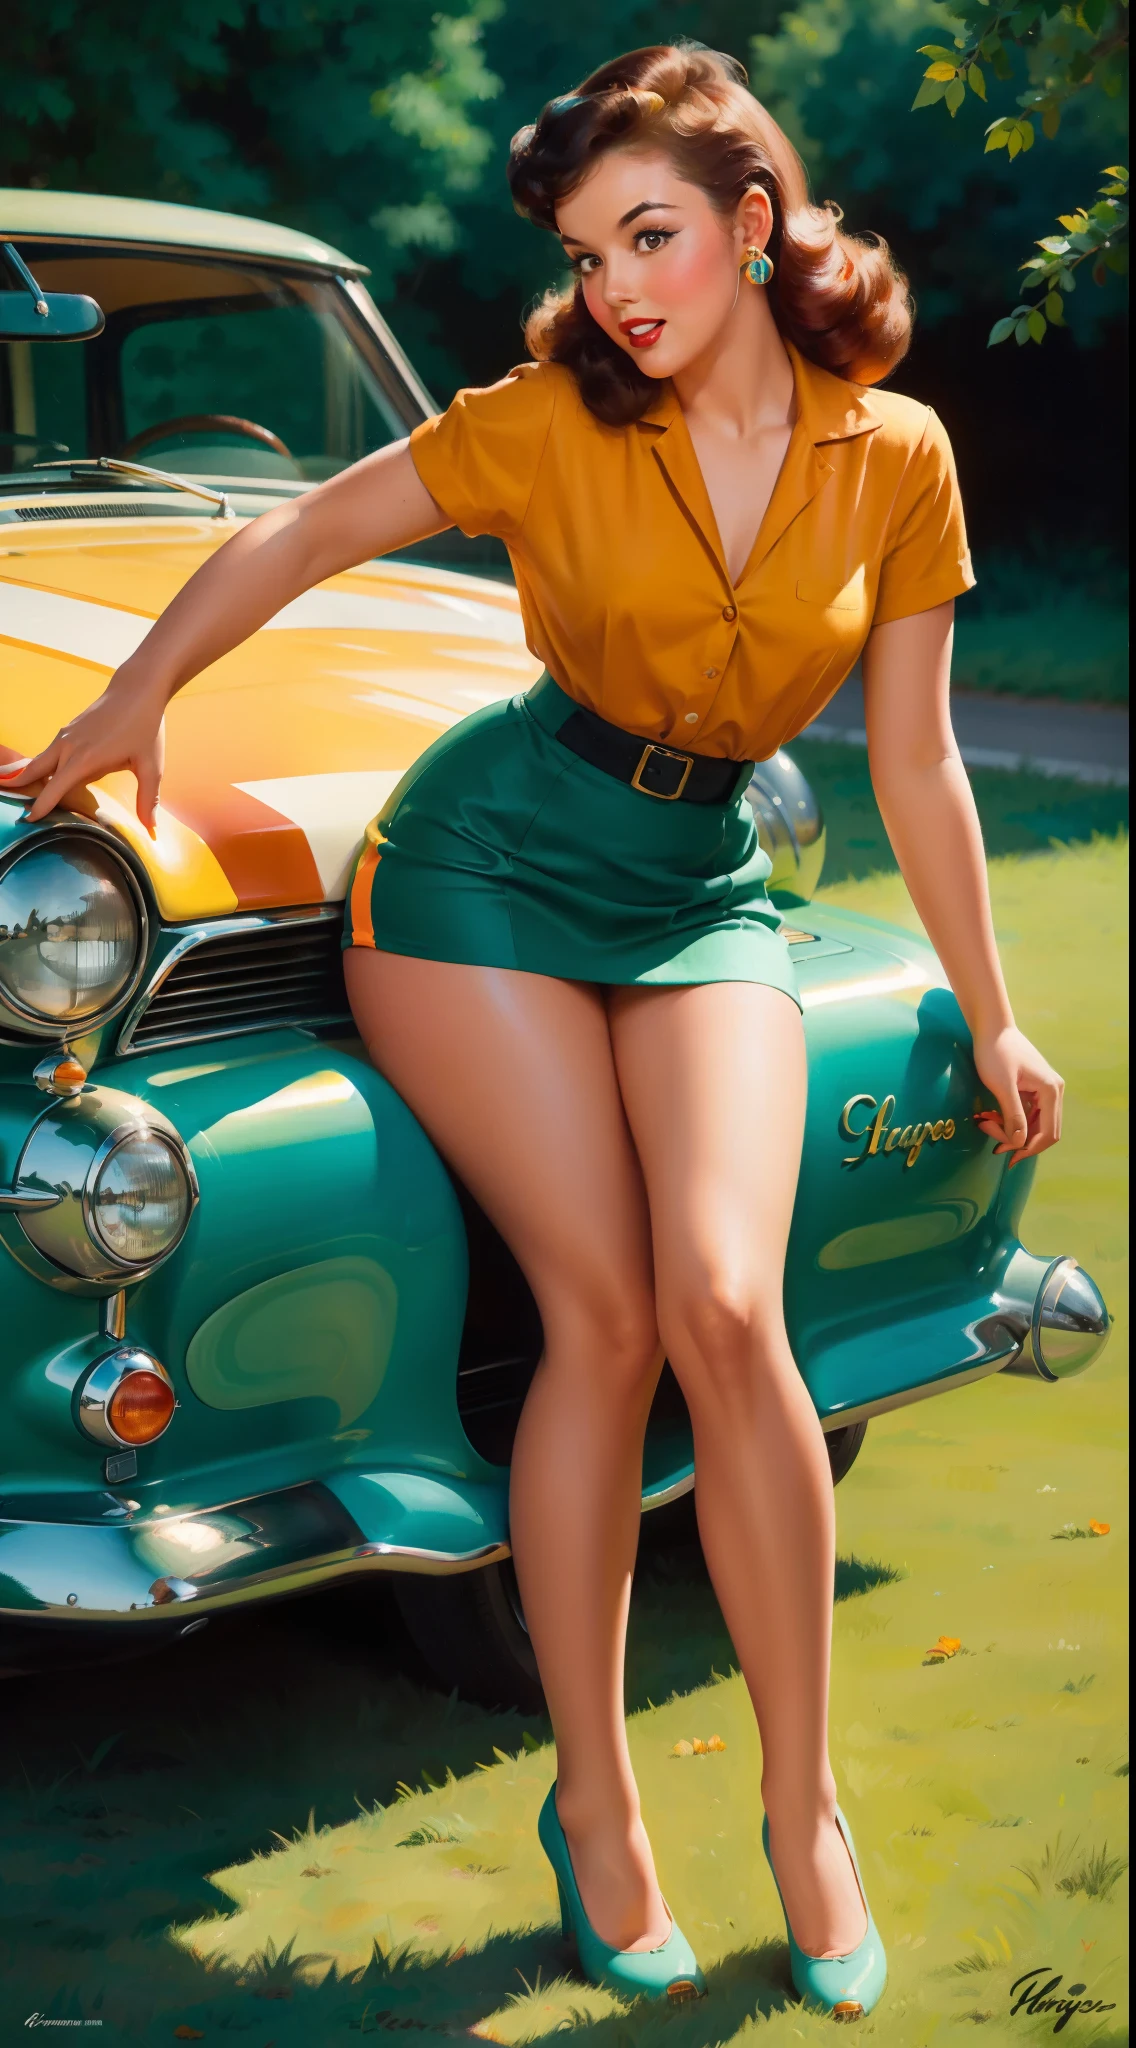 20 years old girl sitting on the ground sheet, in front of a retro car, vintage, retro pin up style, sexy, detailed everything, surprised, mini tight skirt, flowing skirt, colorful , orange and teal color scheme, masterpieces art work, illustrated,